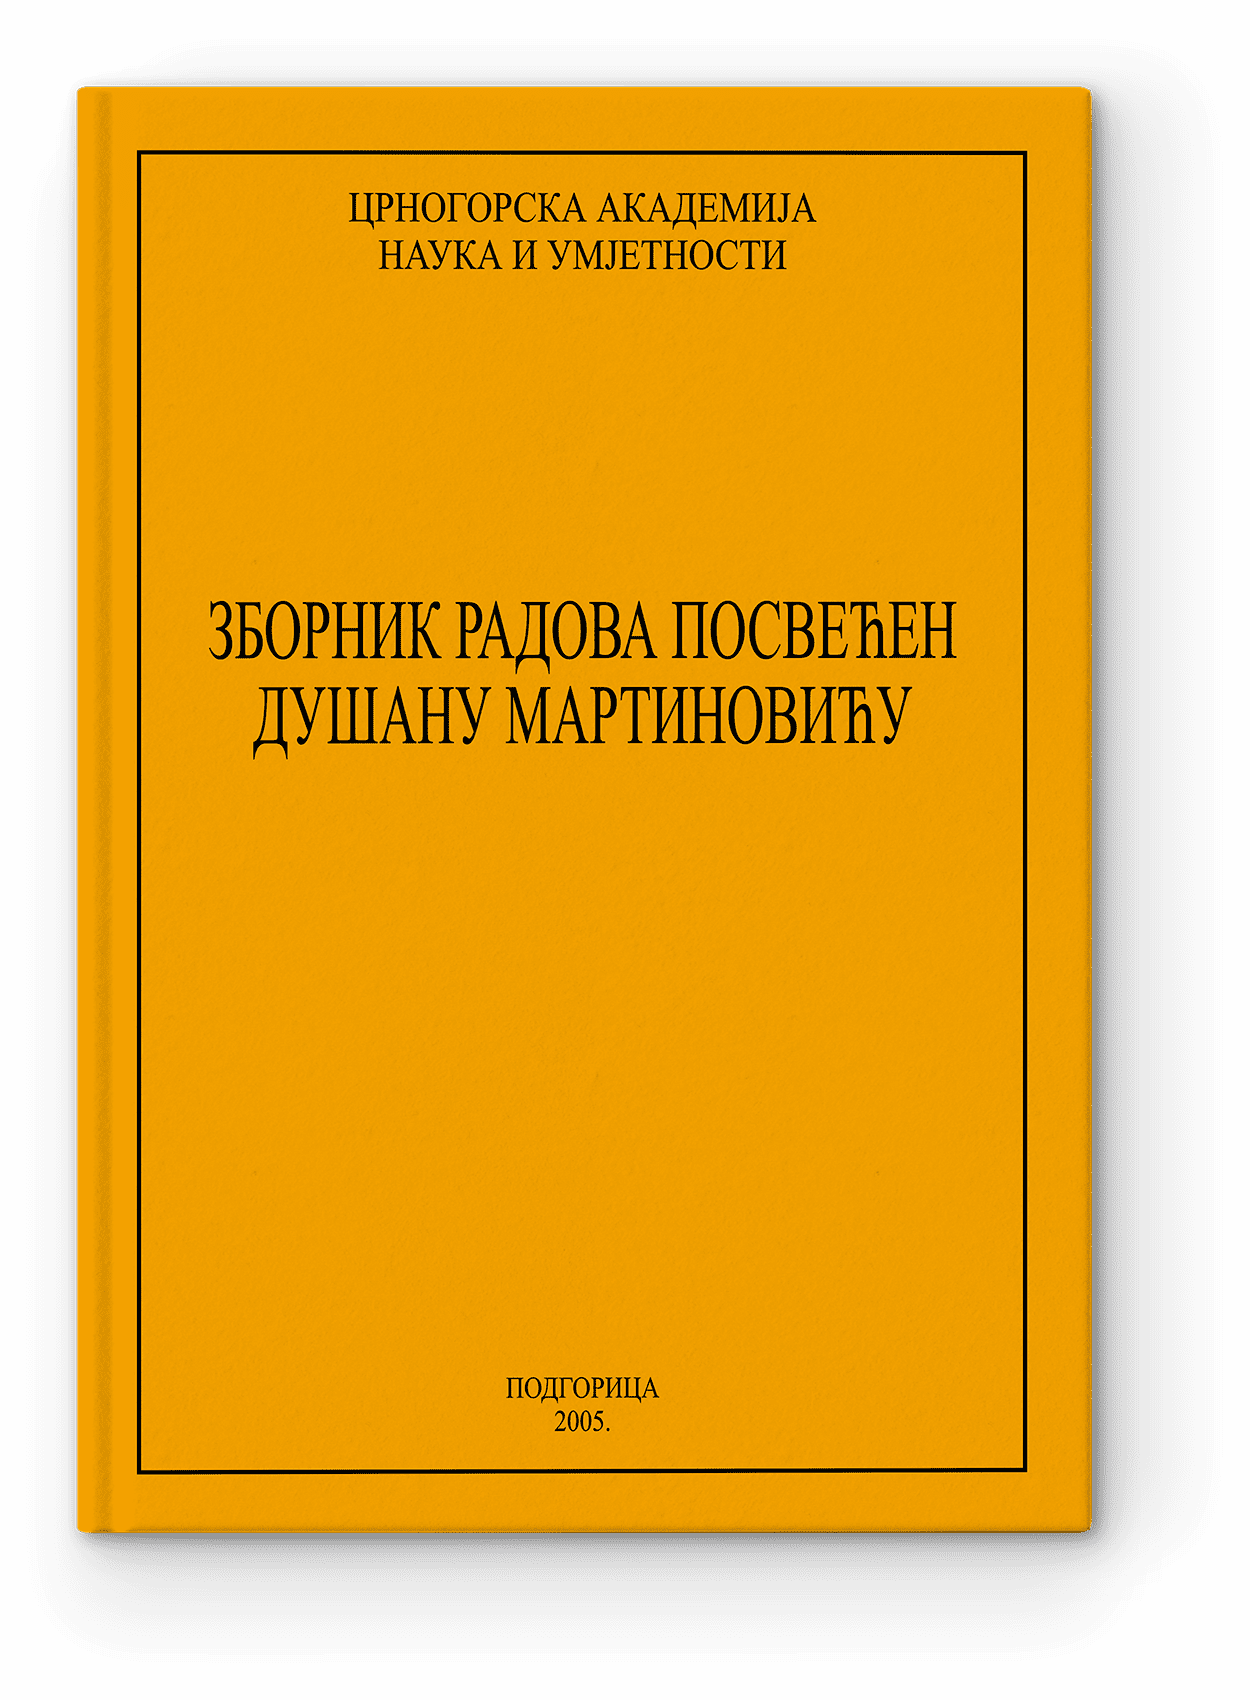 Collection of Scientific Works Dedicated to the Dušan Martinović